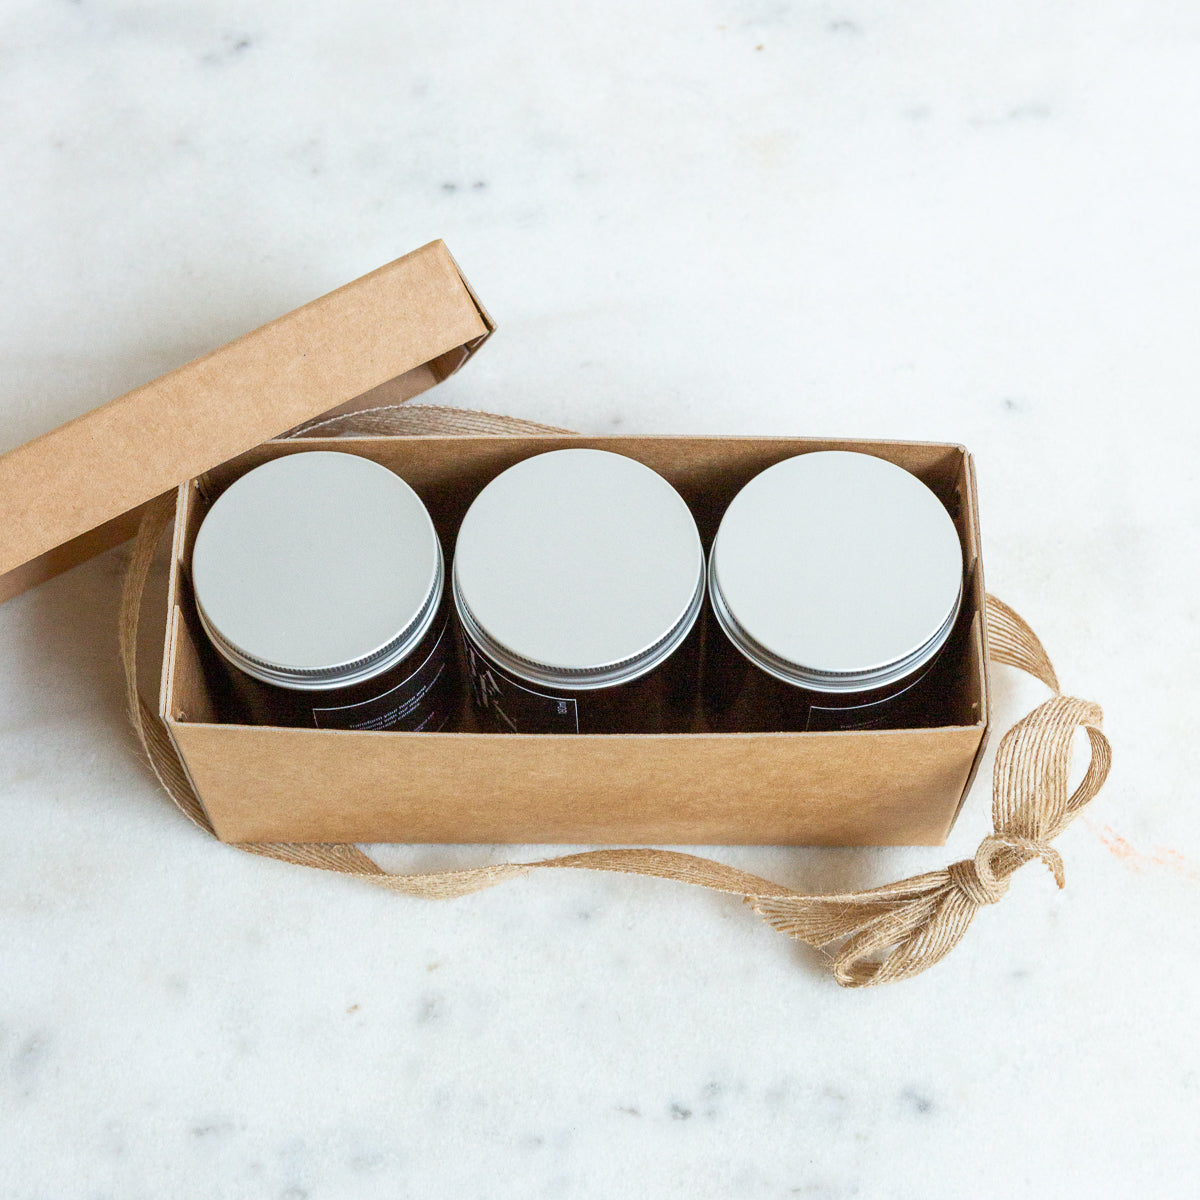 Three hand poured aromatherapy soy wax candles to give feelings of wellbeing. Each candle is scented with blends of pure essential oils which are known for their beneficial qualities. The three scents of candle are "Focus" which includes Lavender, Rosemary and Eucalyptus to increase parity of mind and focus. Unwind includes Rose, Jasmine and Ylang Ylang to reduce anxiety and stress. Awaken helps you feel revitalised including Lemon, Eucalyptus and Peppermint.